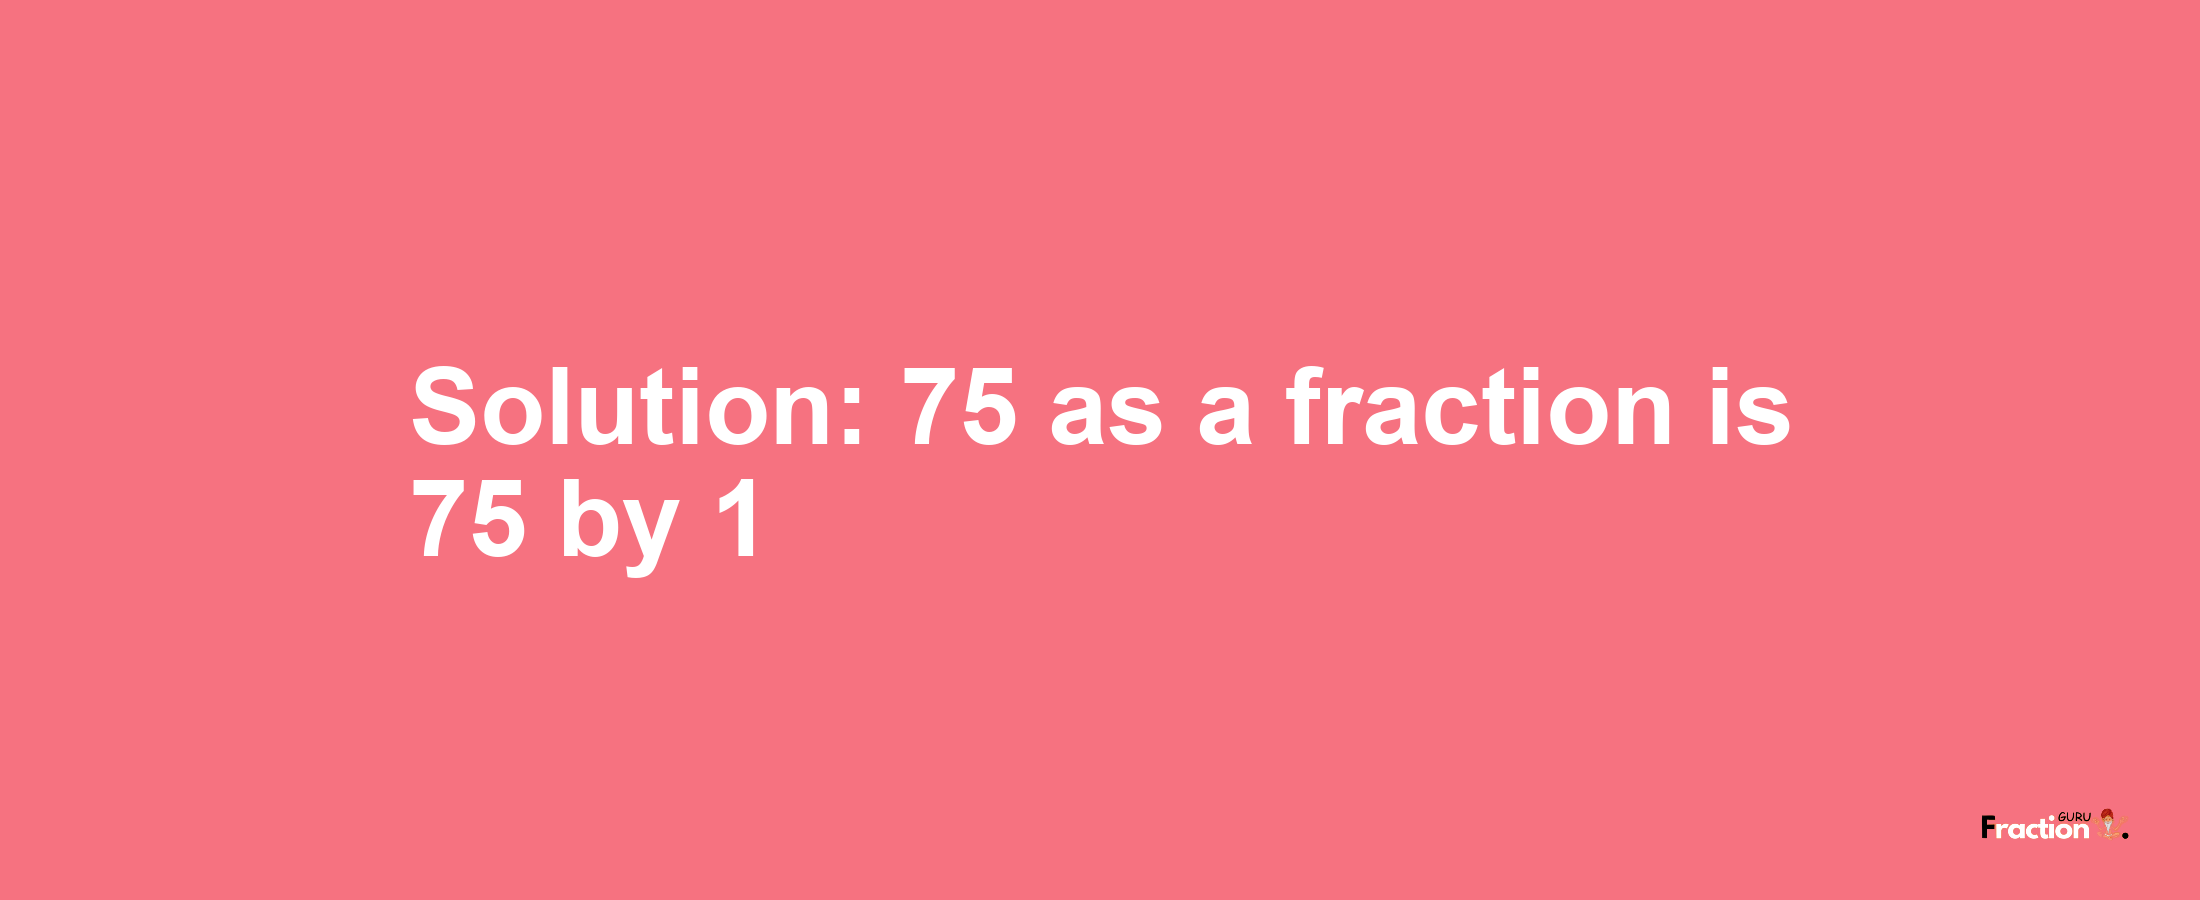 Solution:75 as a fraction is 75/1